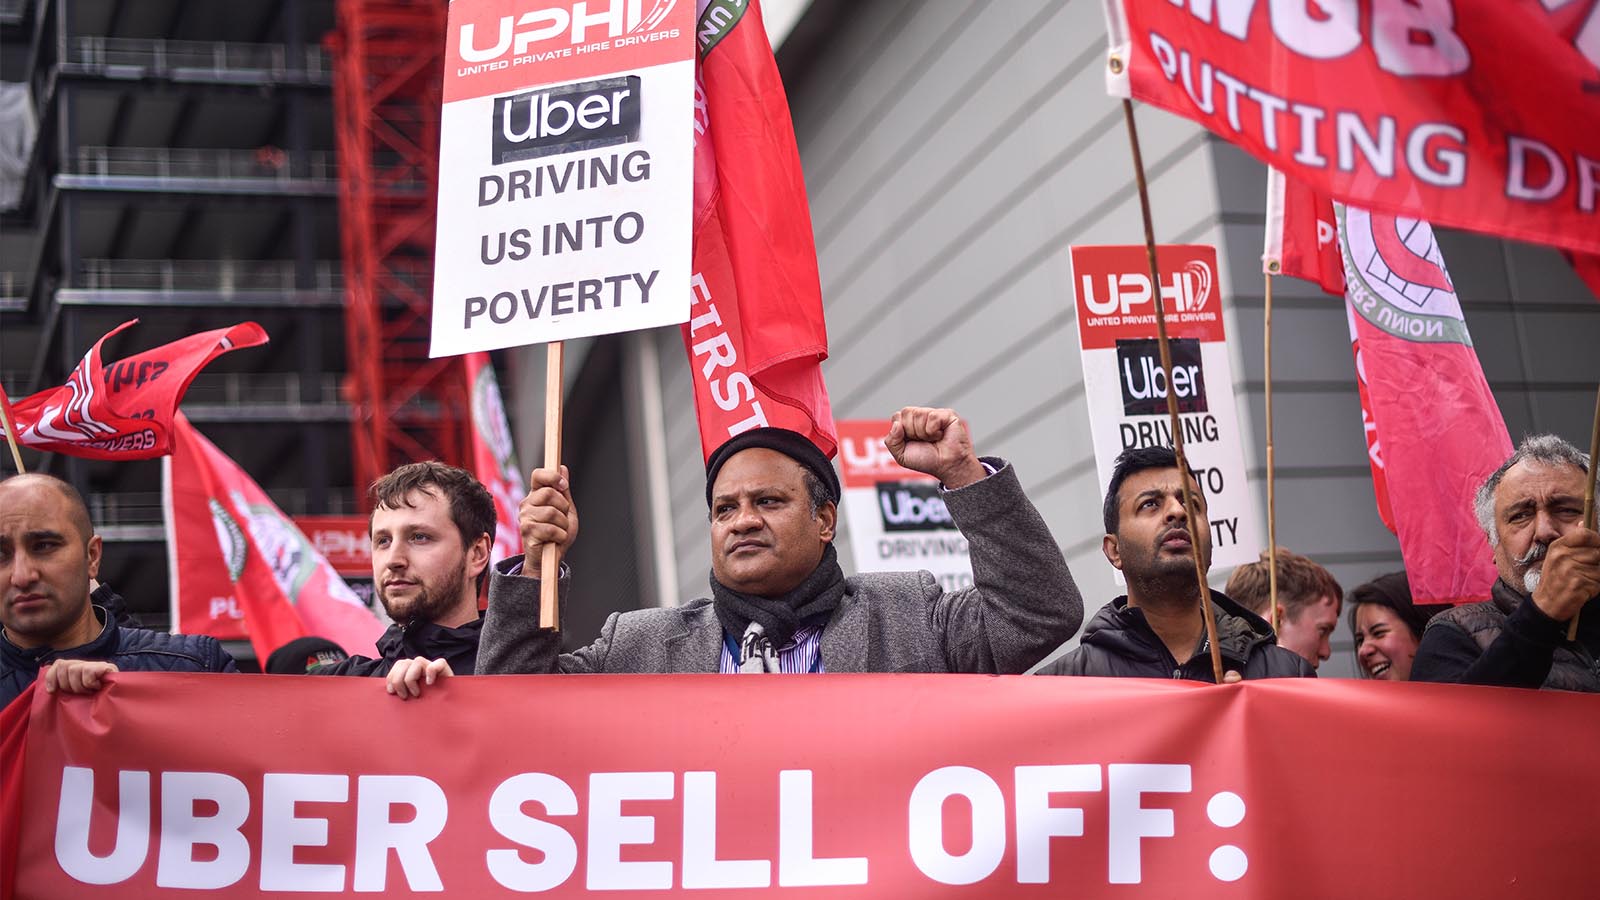 Uber drivers protesting in front of Uber offices, London (Photo: Getty Images)